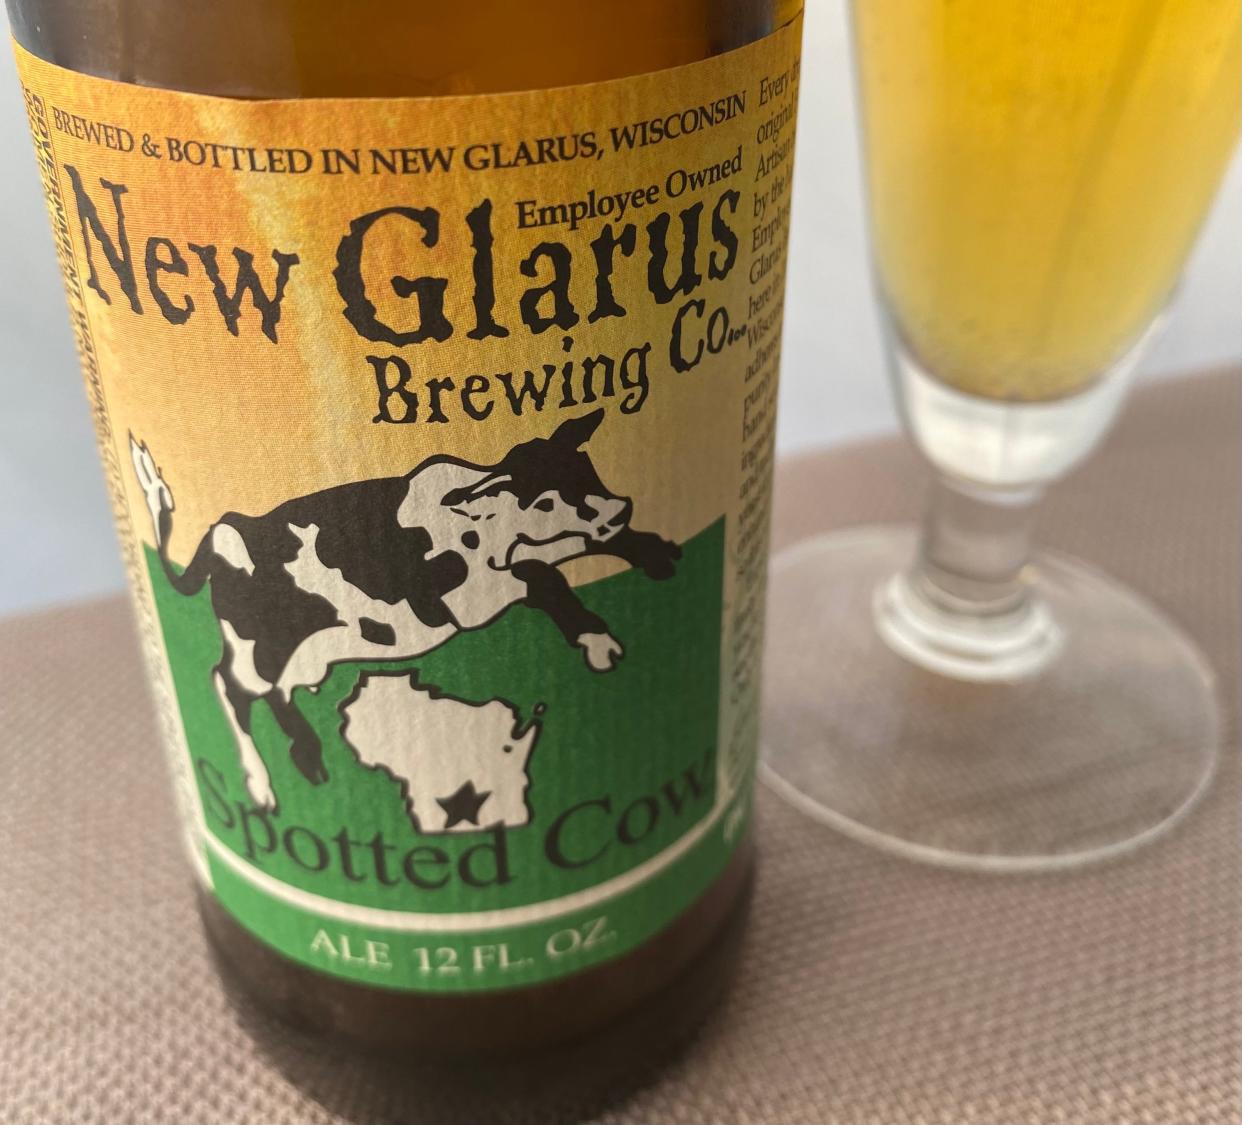 New Glarus Brewing, makers of Spotted Cow, will be among 21 breweries offering unlimited tastings at the “Pour Another Round” Outdoor Winter Beer Fest on March 9 at Badger State Brewing.